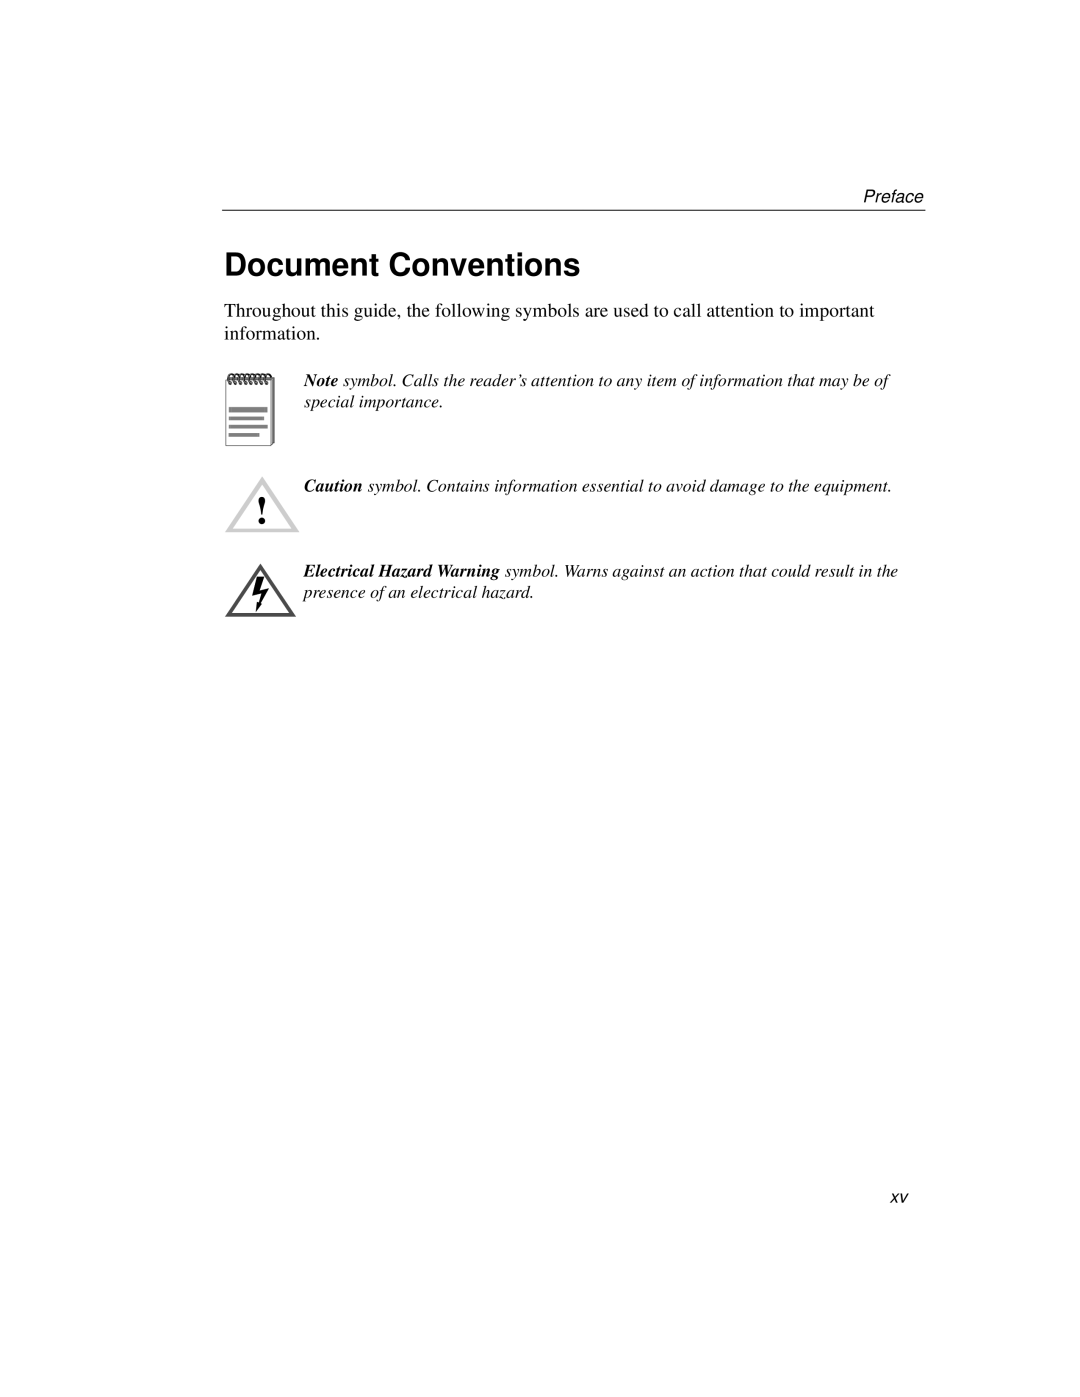 Cabletron Systems 520, 510 manual Document Conventions 